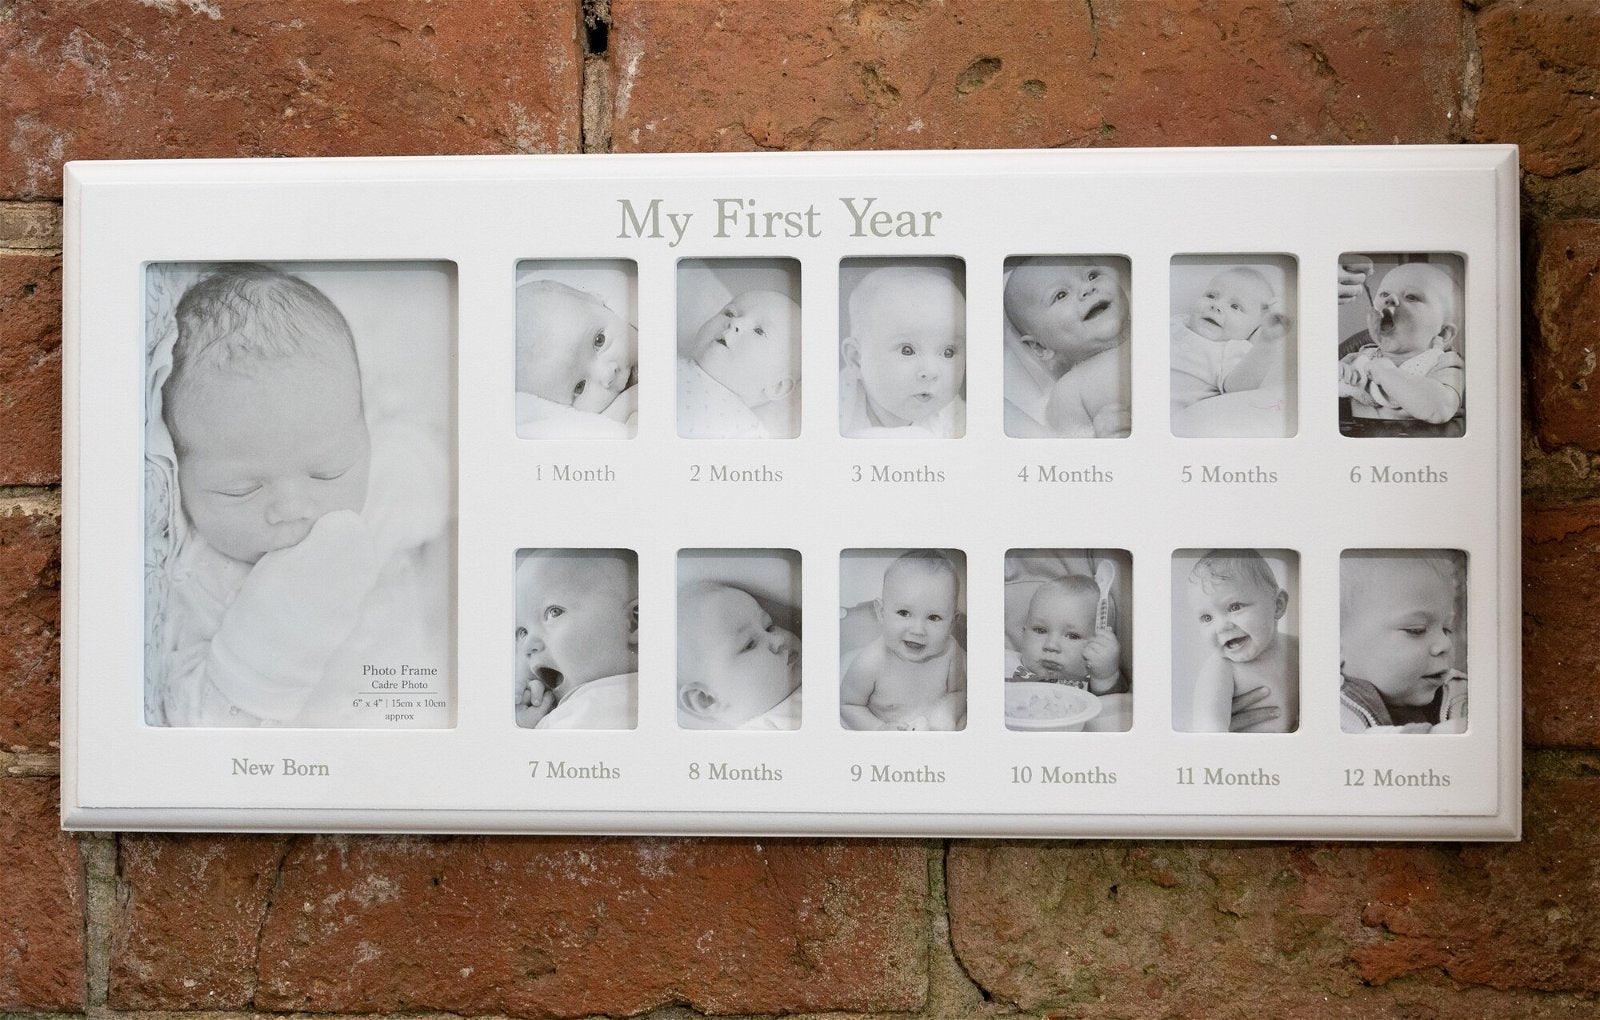 View Baby My First Year Photo Frame information